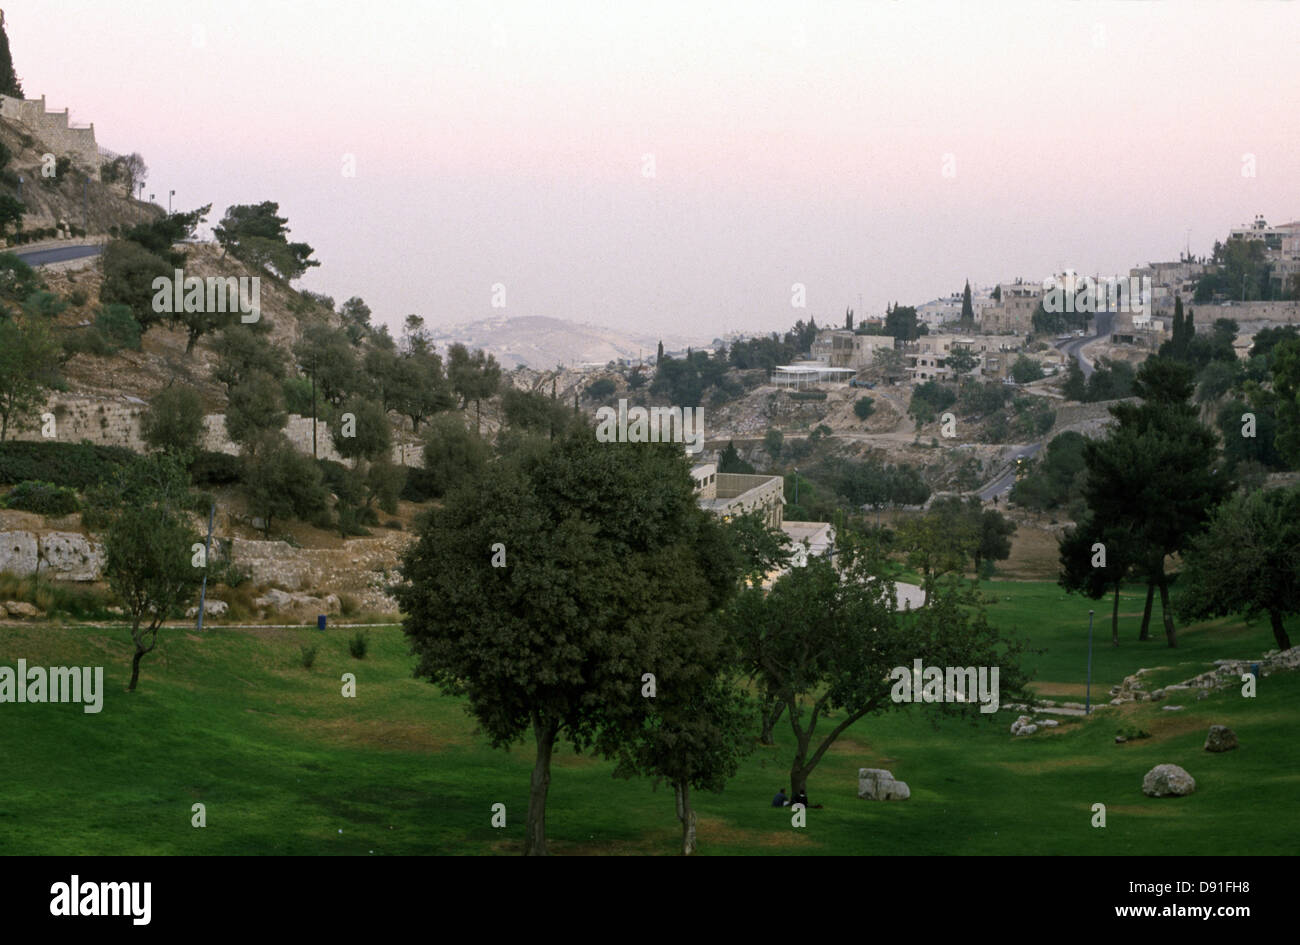 View toward Valley of Hinnom or Gei Ben Hinom Valley Park the modern name for the biblical Gehenna or Gehinnom valley surrounding Jerusalem's Old City, Israel Stock Photo